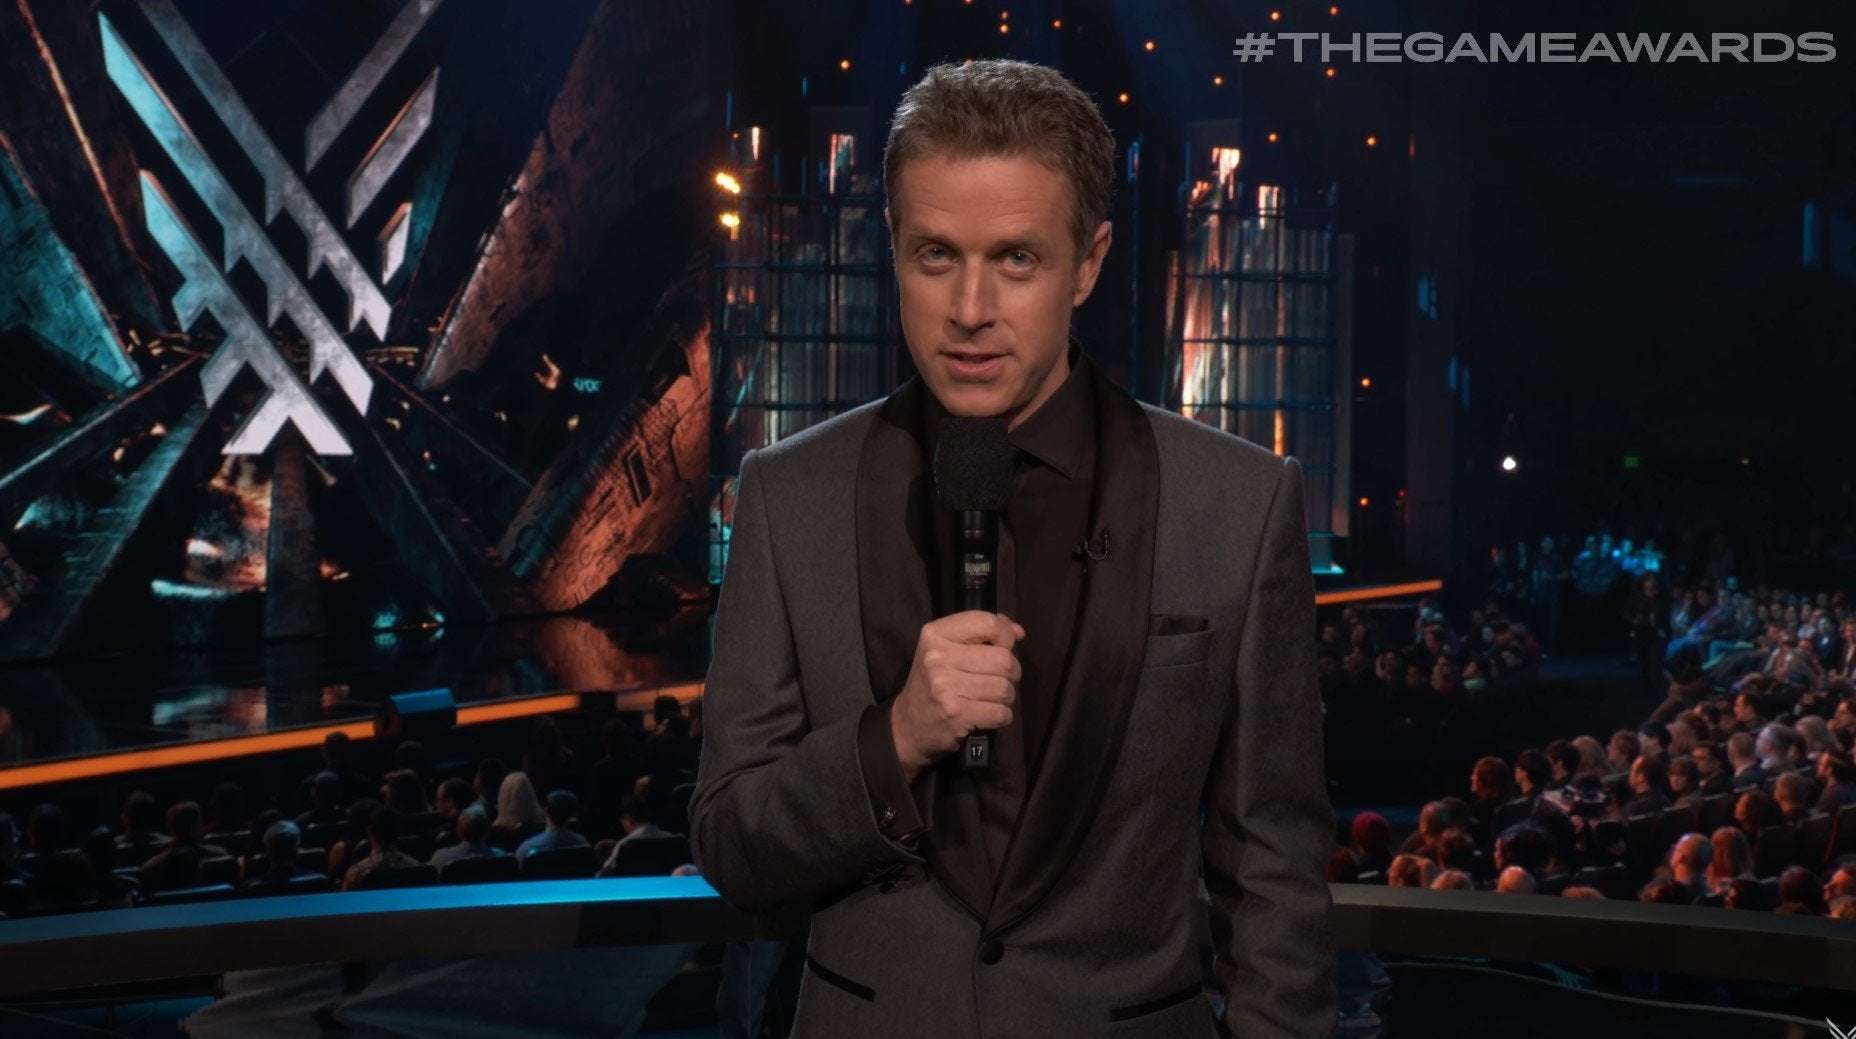 image for Geoff Keighley says Summer Game Fest will be ‘primarily focused’ on announced games